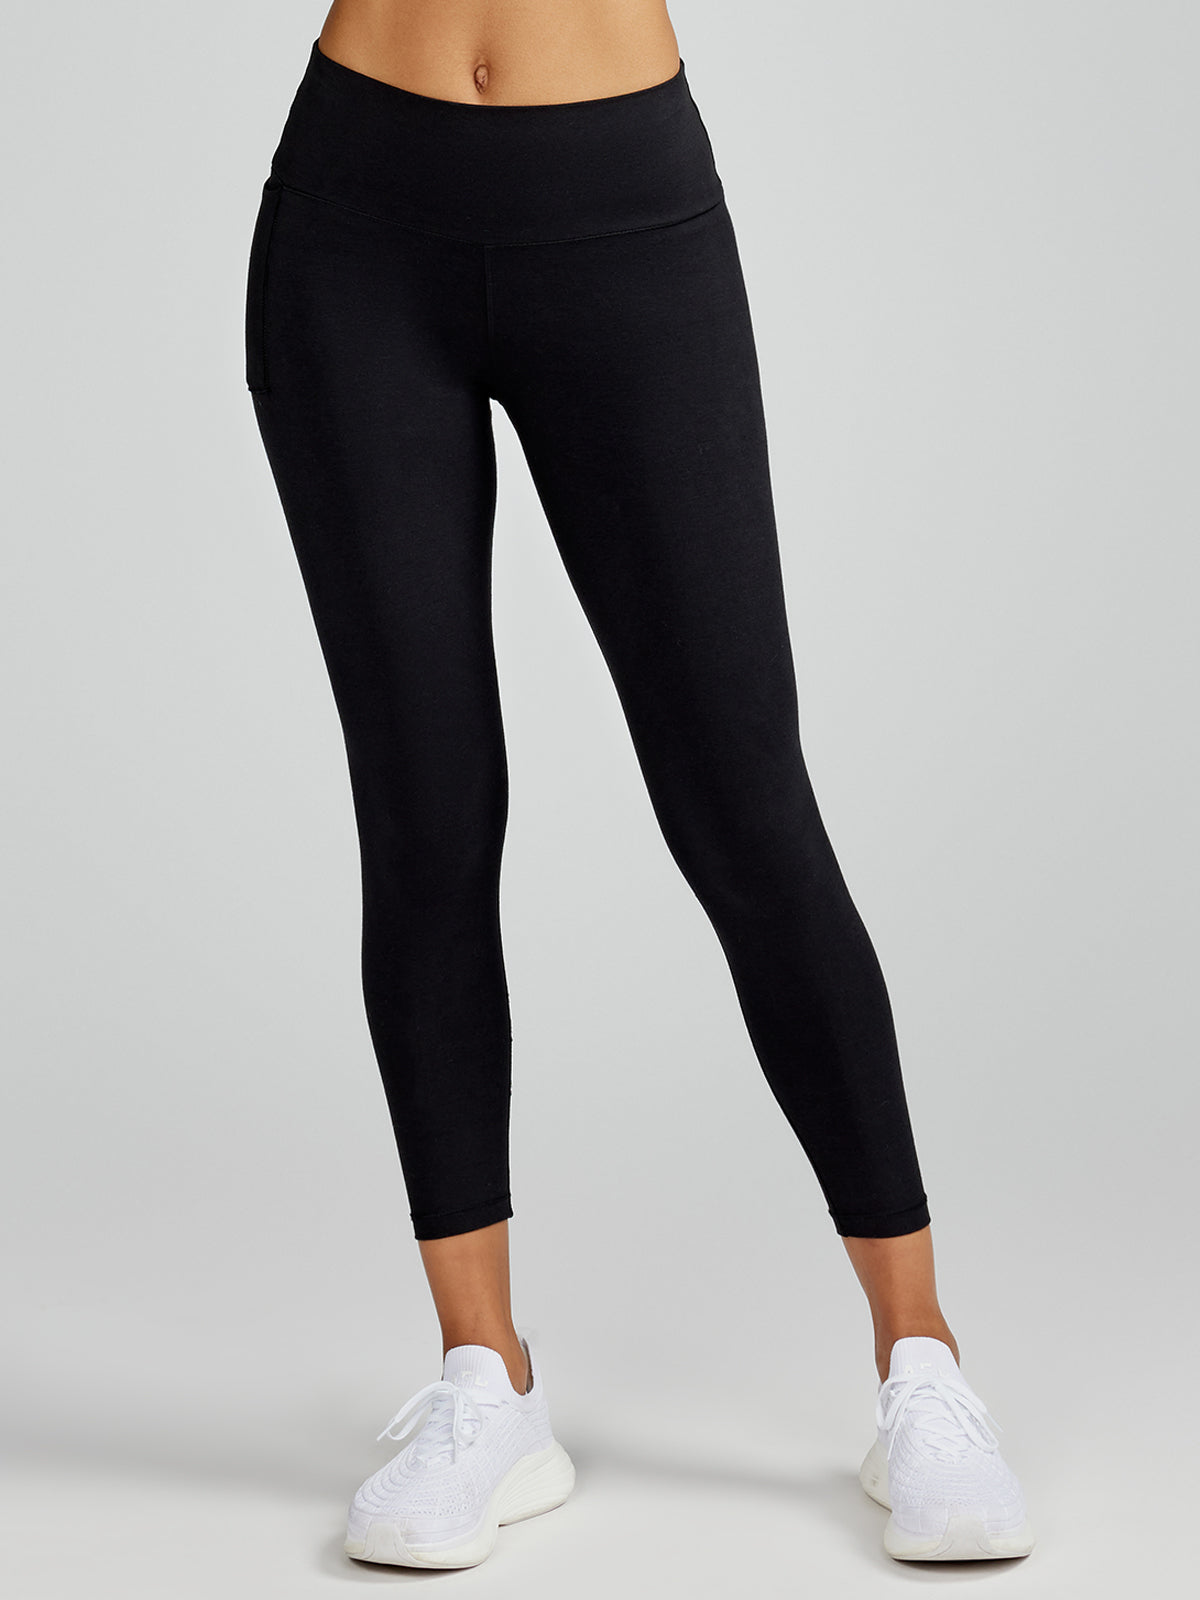 Yoga Pants Women With Pockets - Best Price in Singapore - Dec 2023